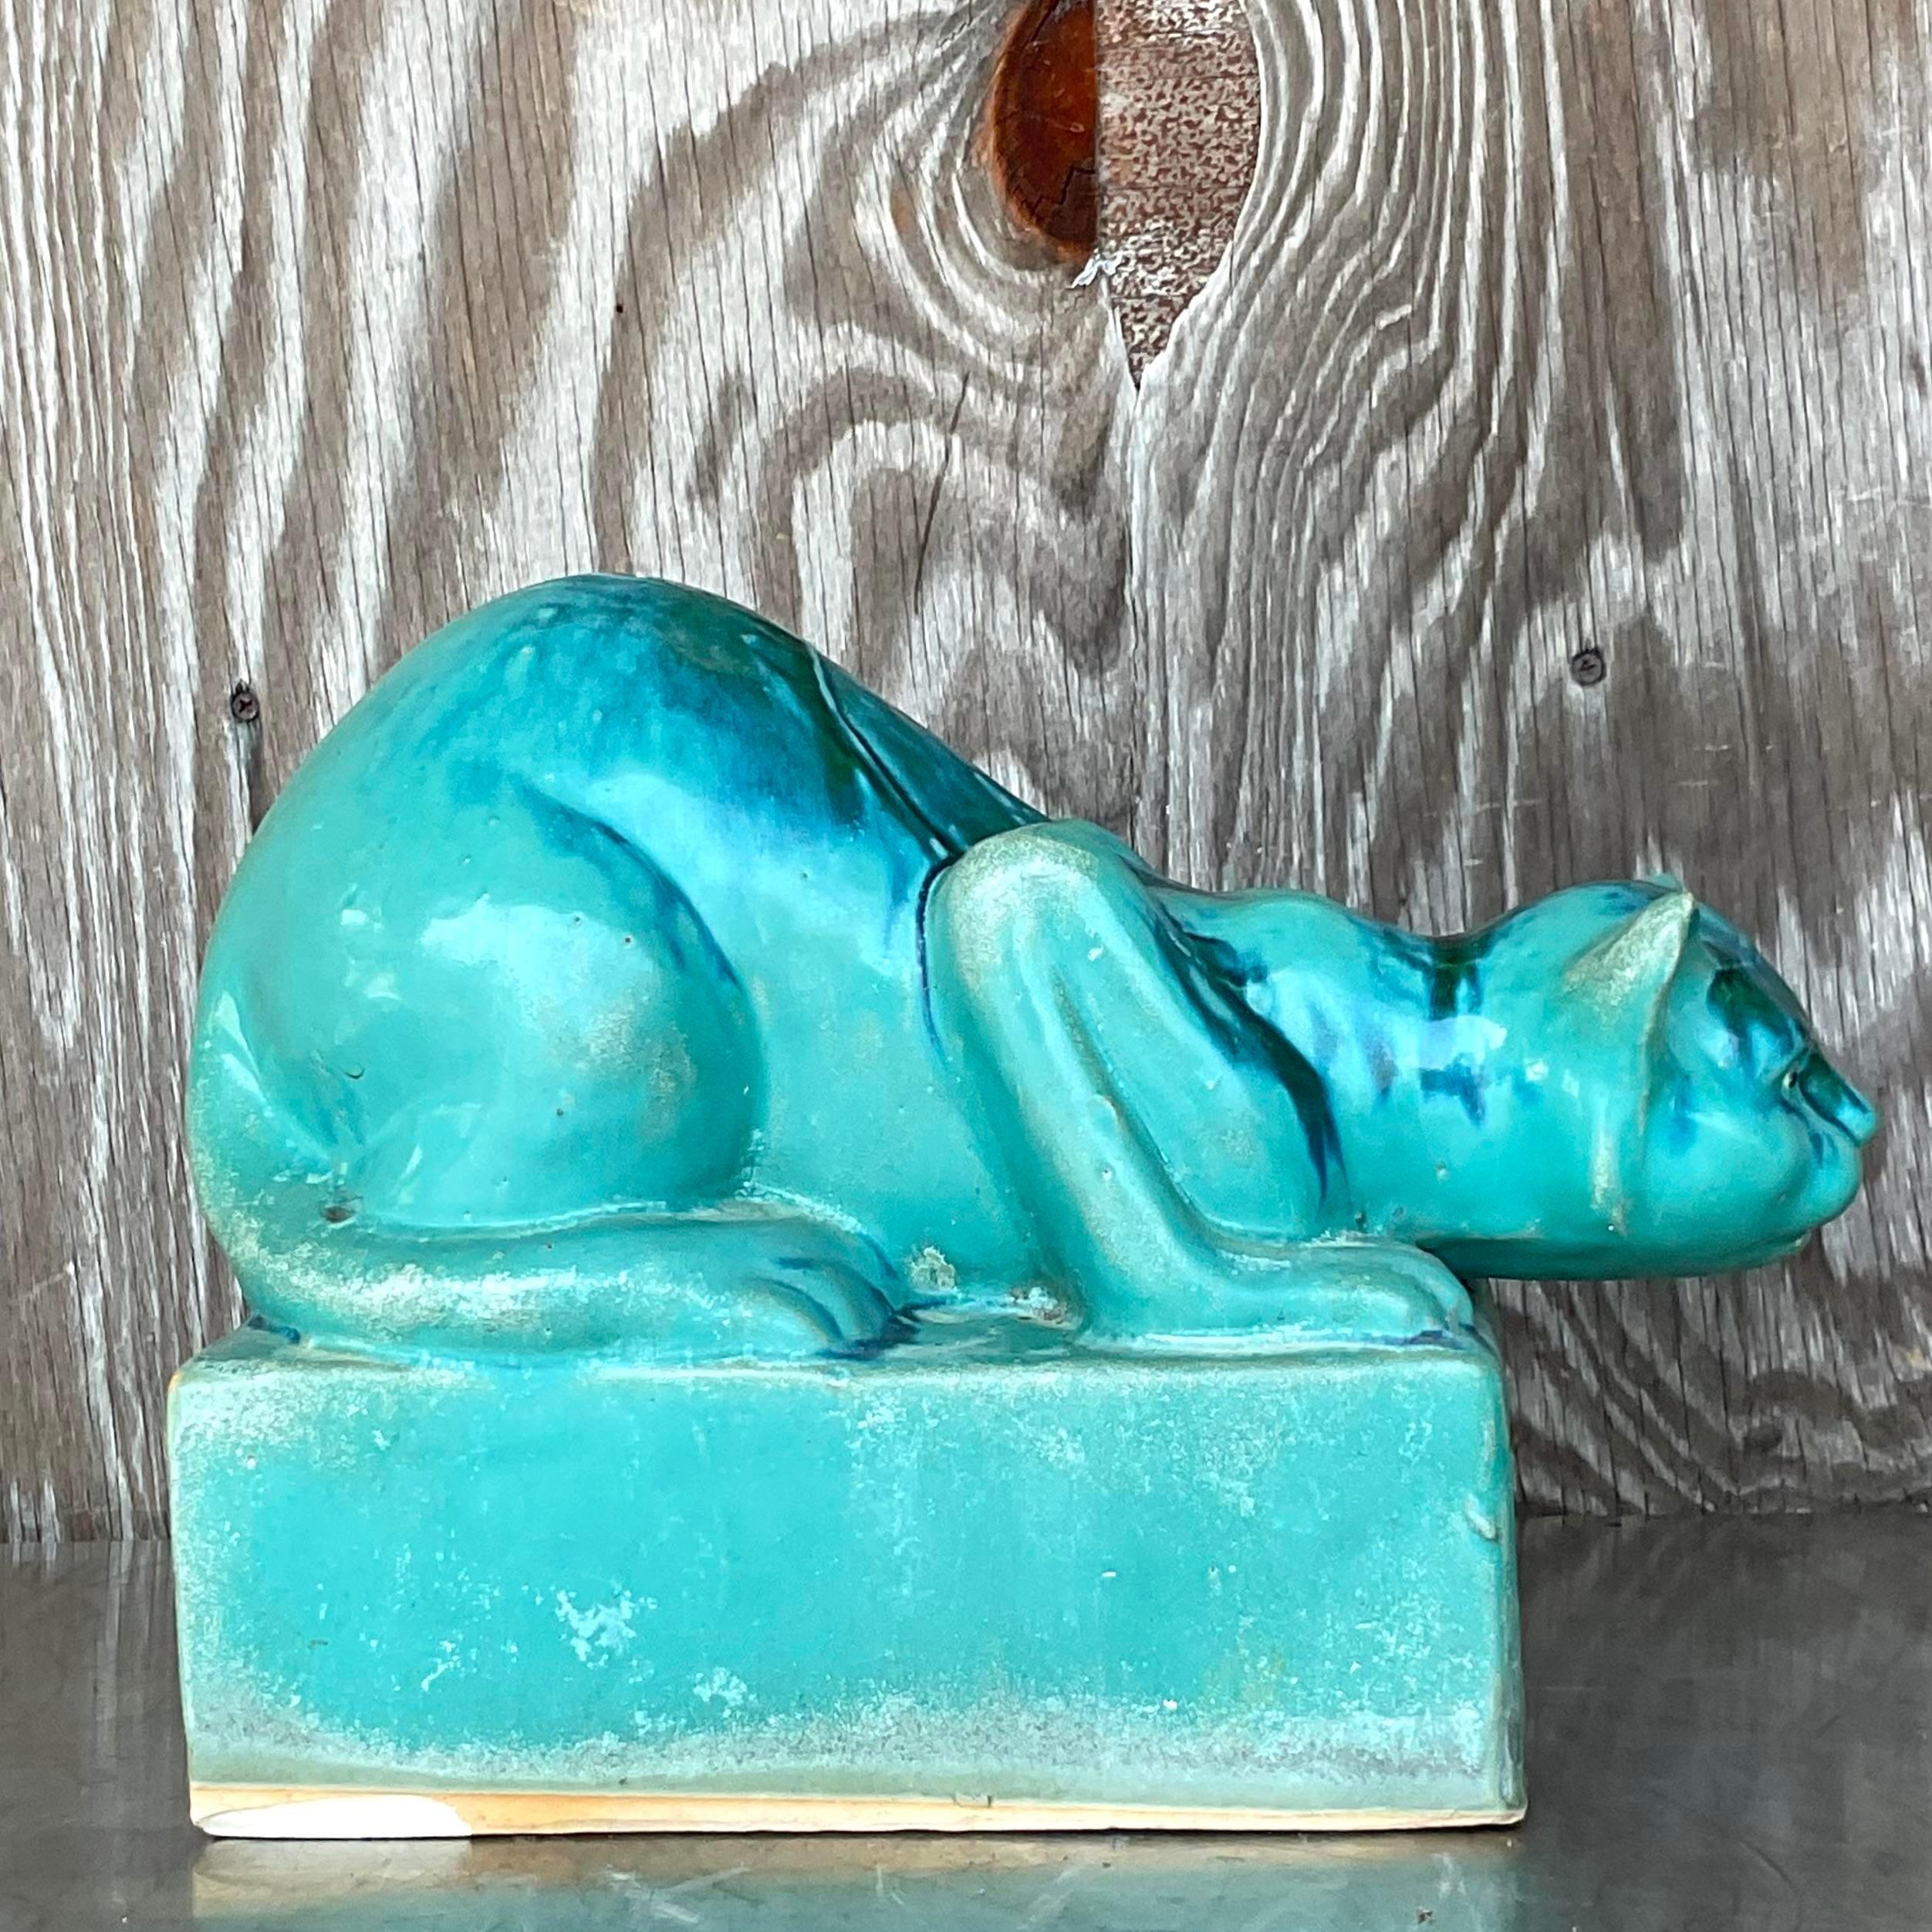 A fabulous vintage Boho cat. A chic glazed ceramic finish with the most beautiful blue green color. Acquired from a Palm Beach estate.